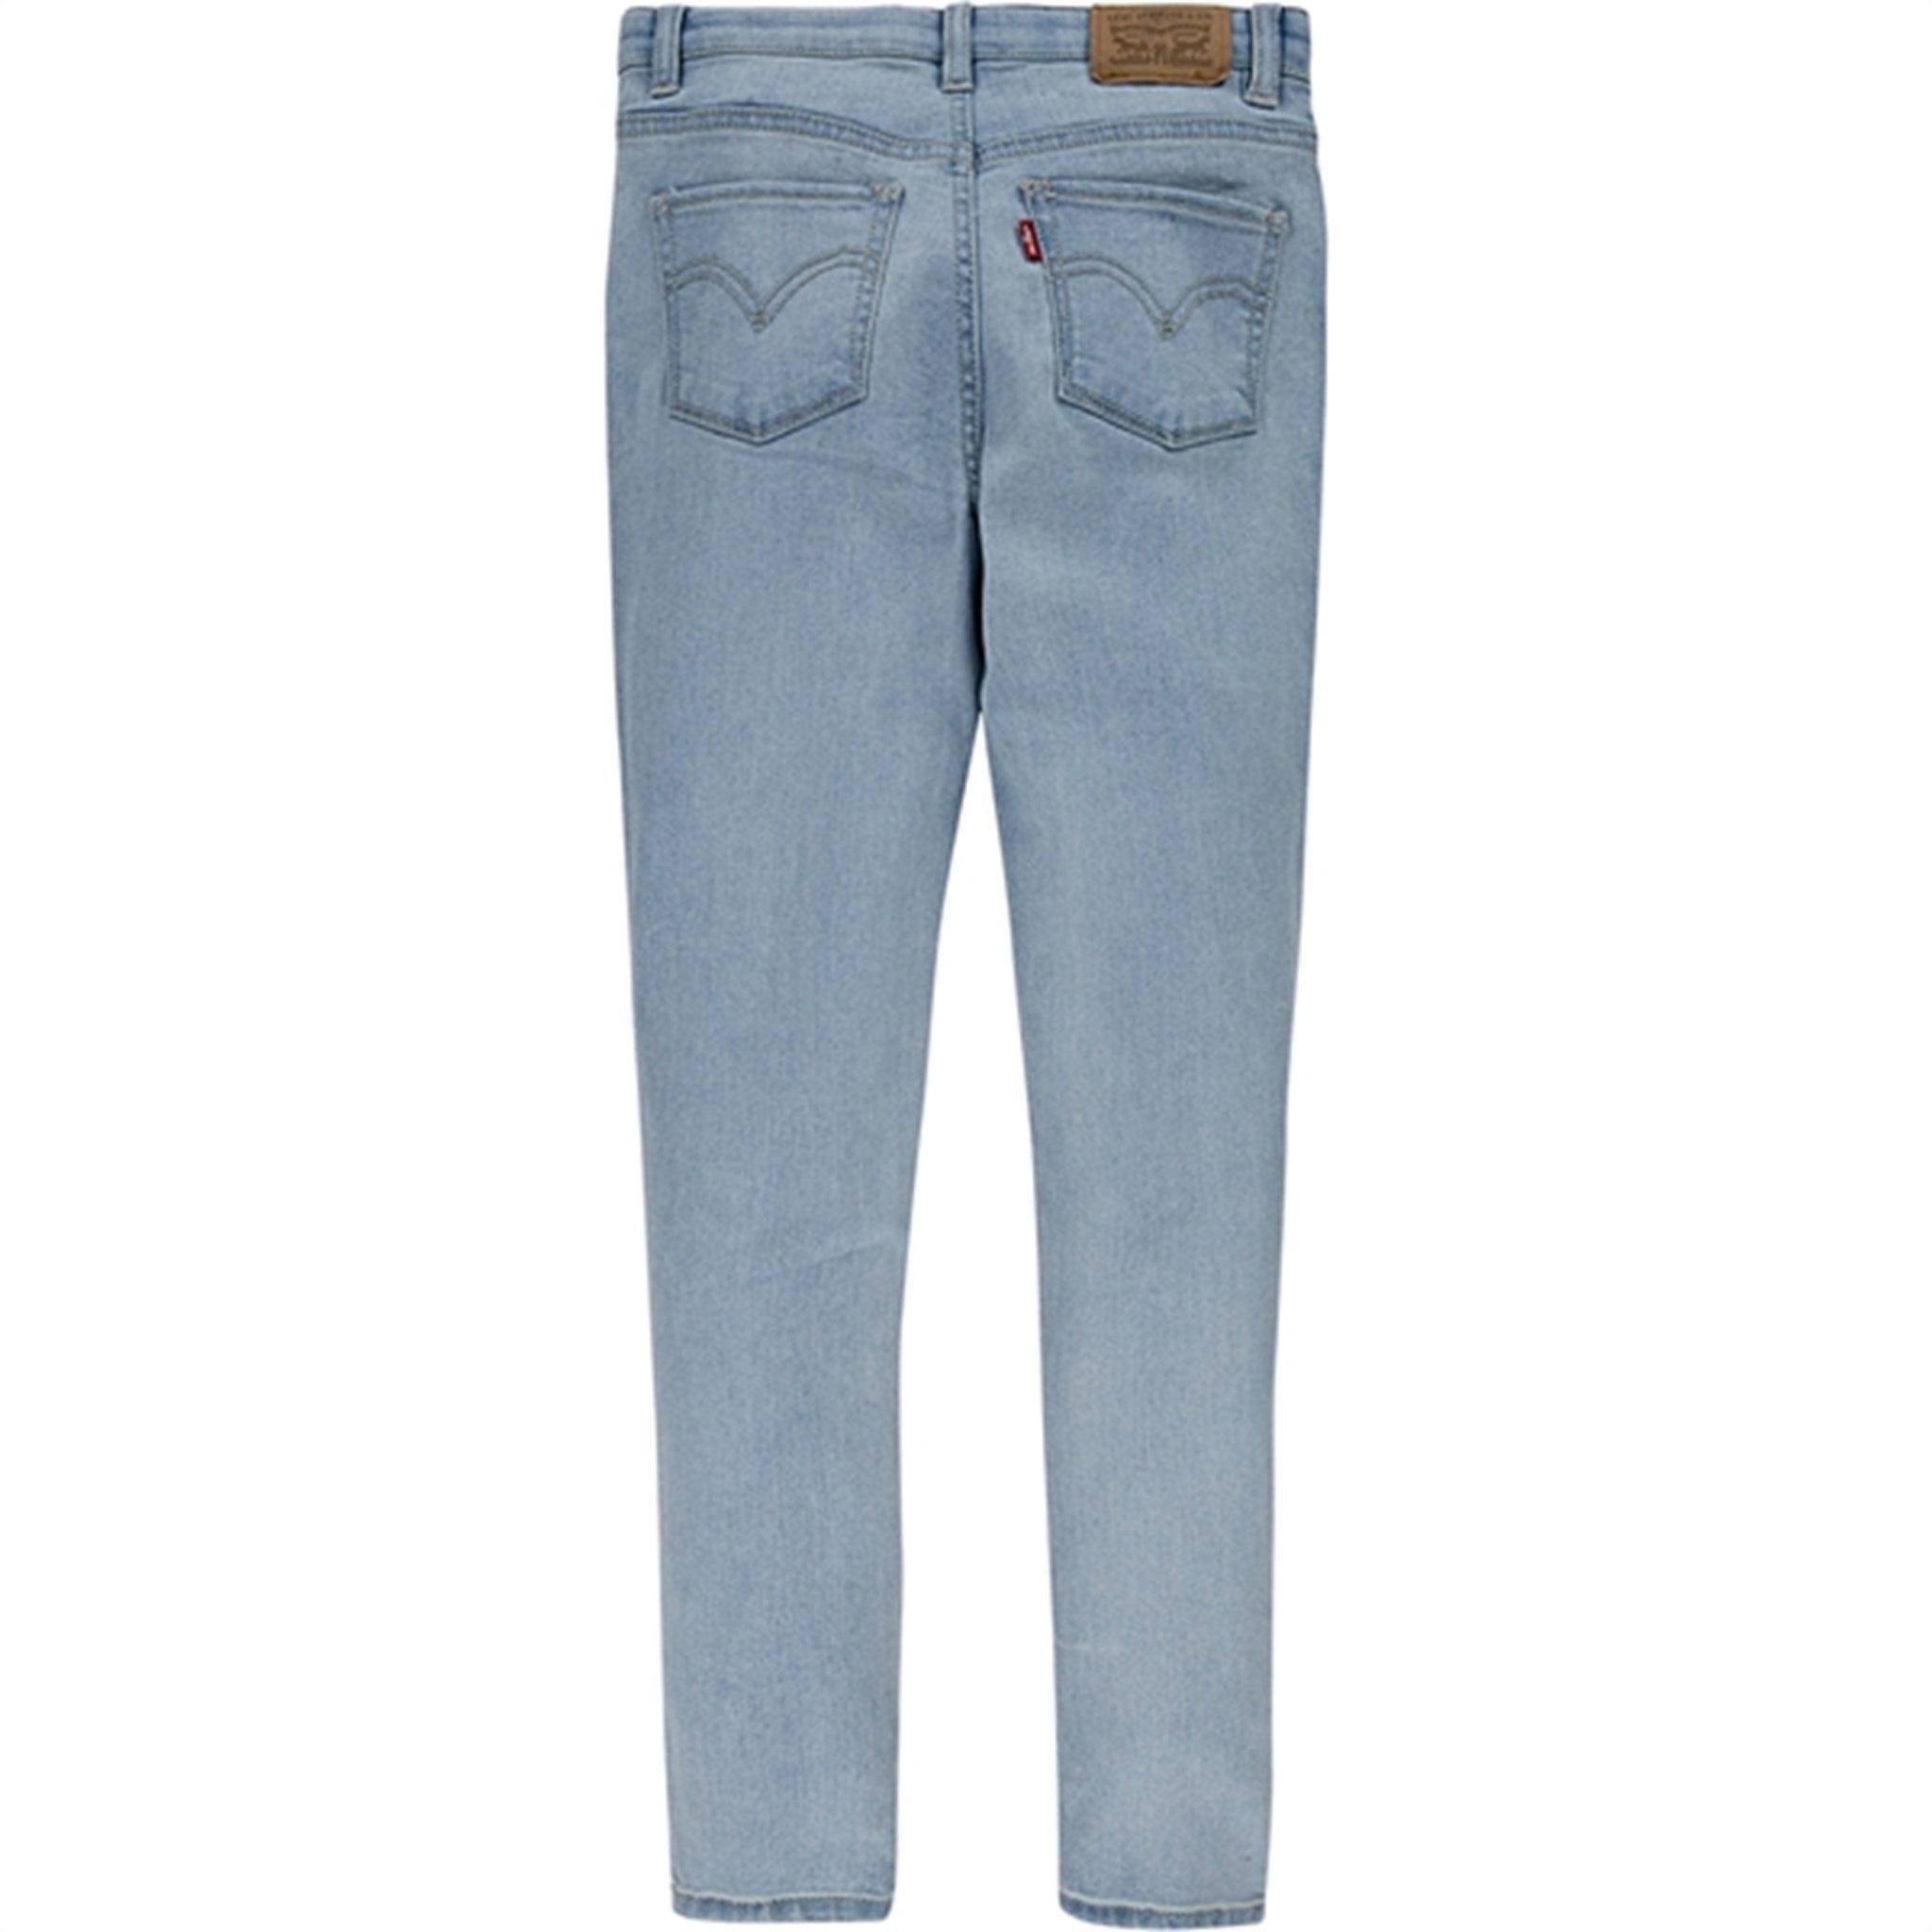 Levi's 720 Girls High Rise Super Skinny Jeans French Prince